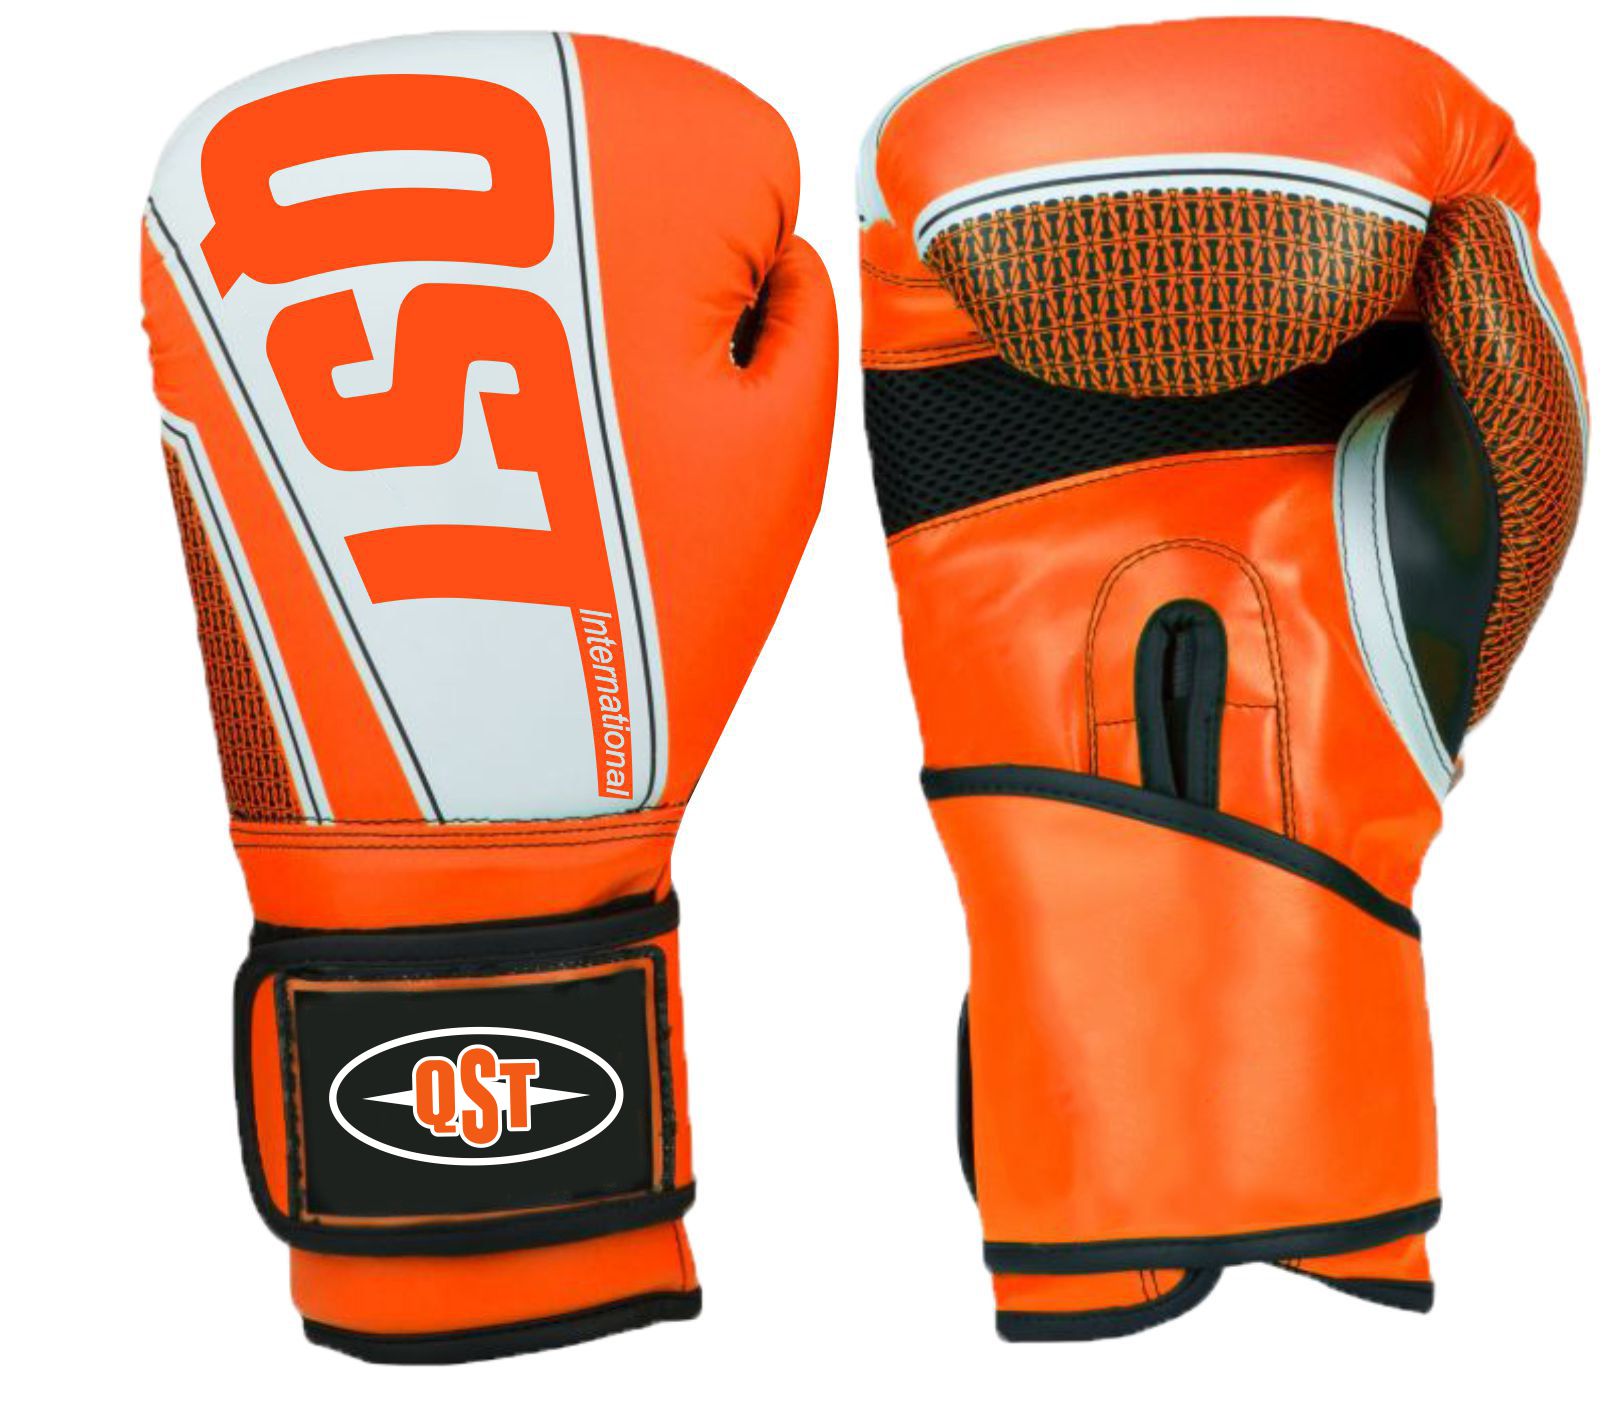 Professional Boxing Gloves - PRG-1506